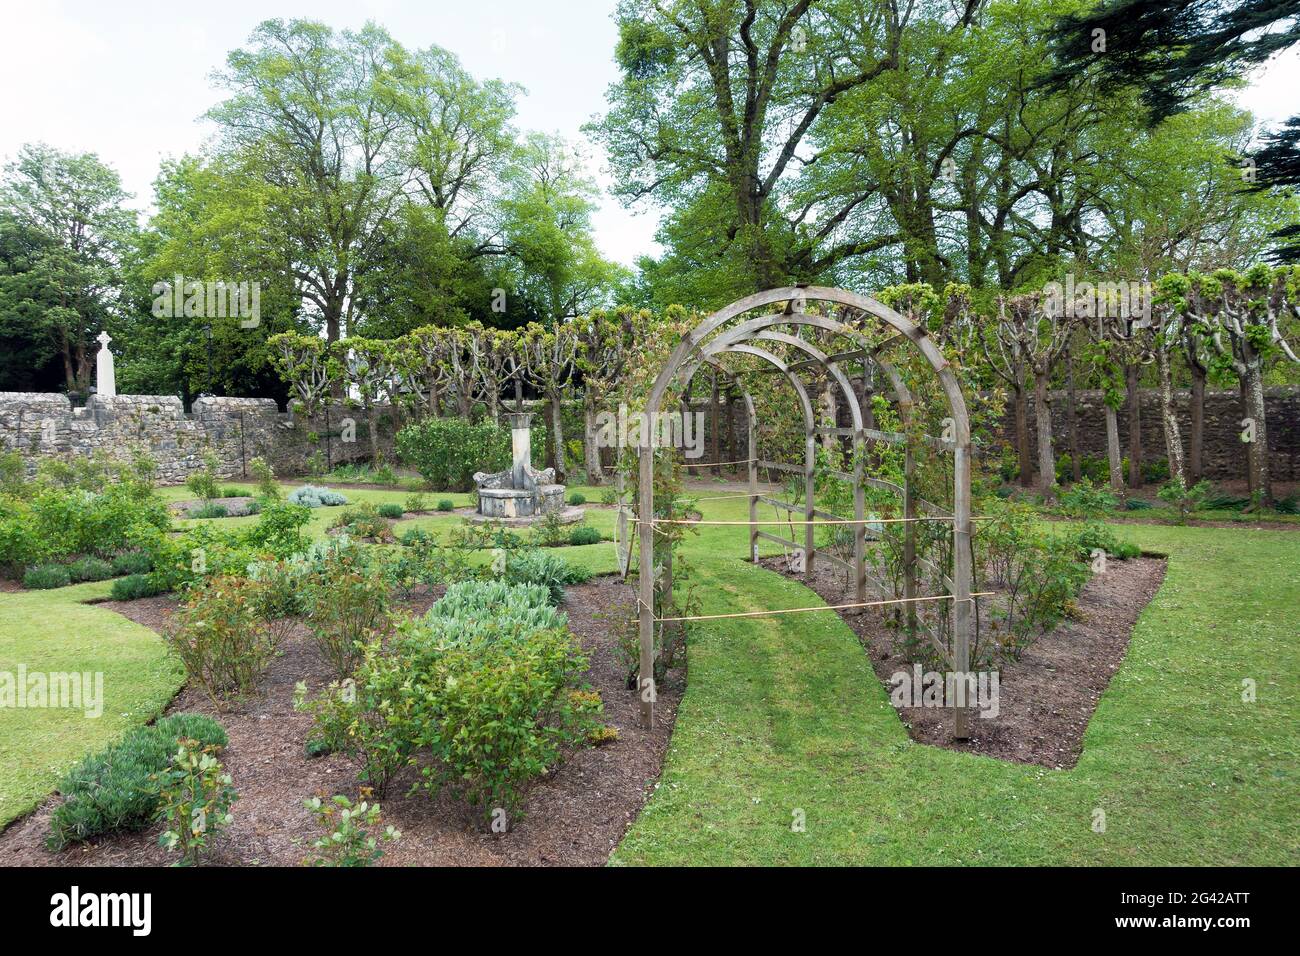 CARDIFF, UK - APRIL 27 : Walled formal garden at St Fagans National Museum of History in Cardiff on April 27, 2019 Stock Photo